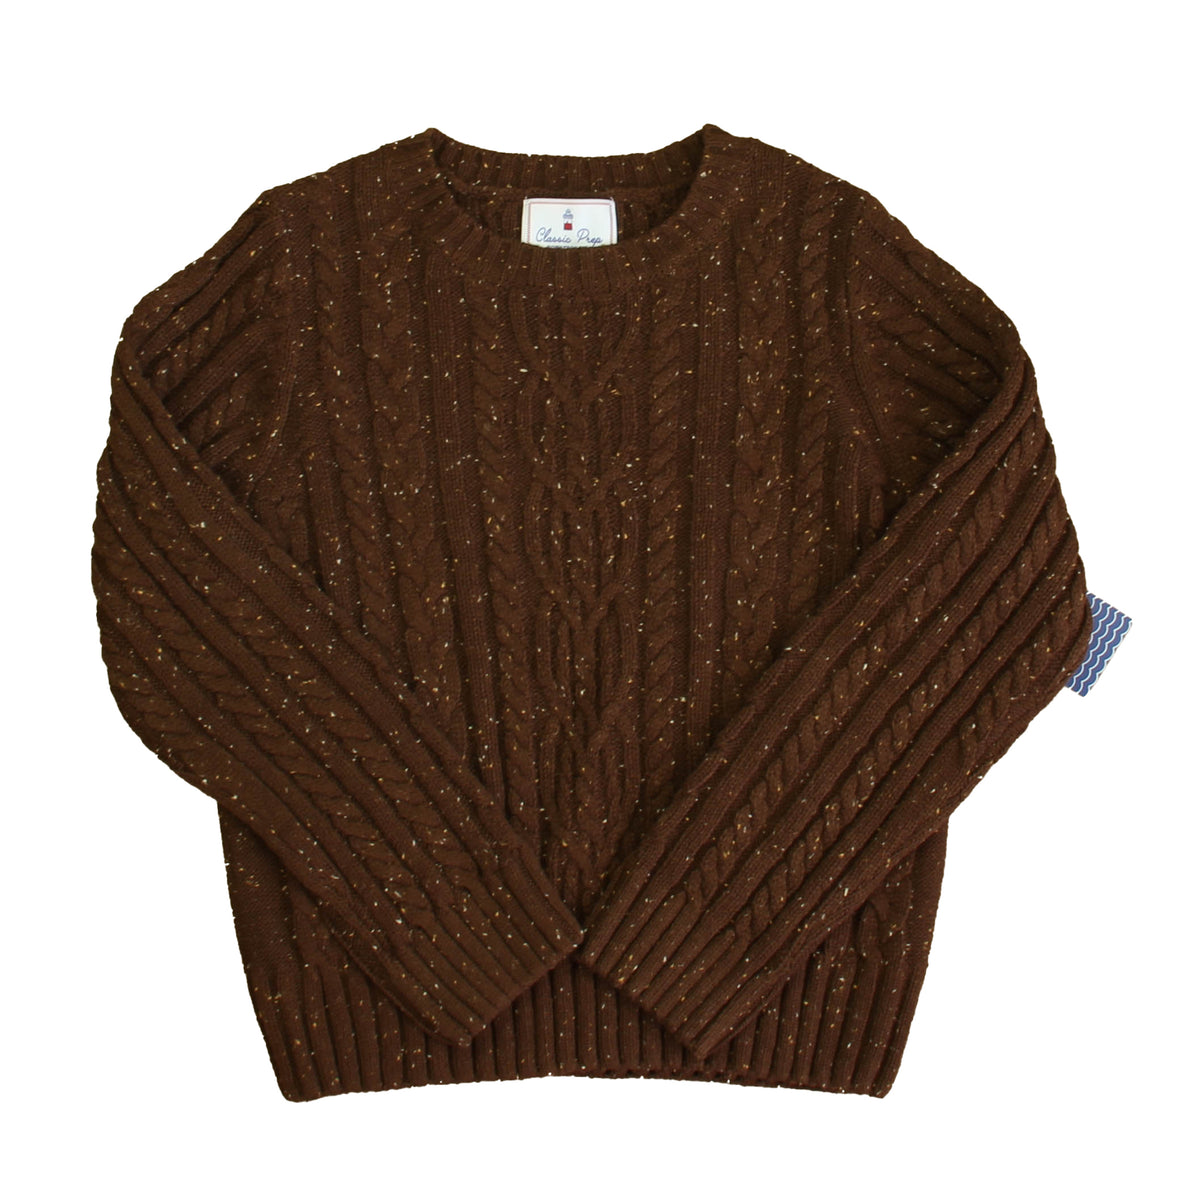 New with Tags: Brown Sweater size: 10 Years -- FINAL SALE